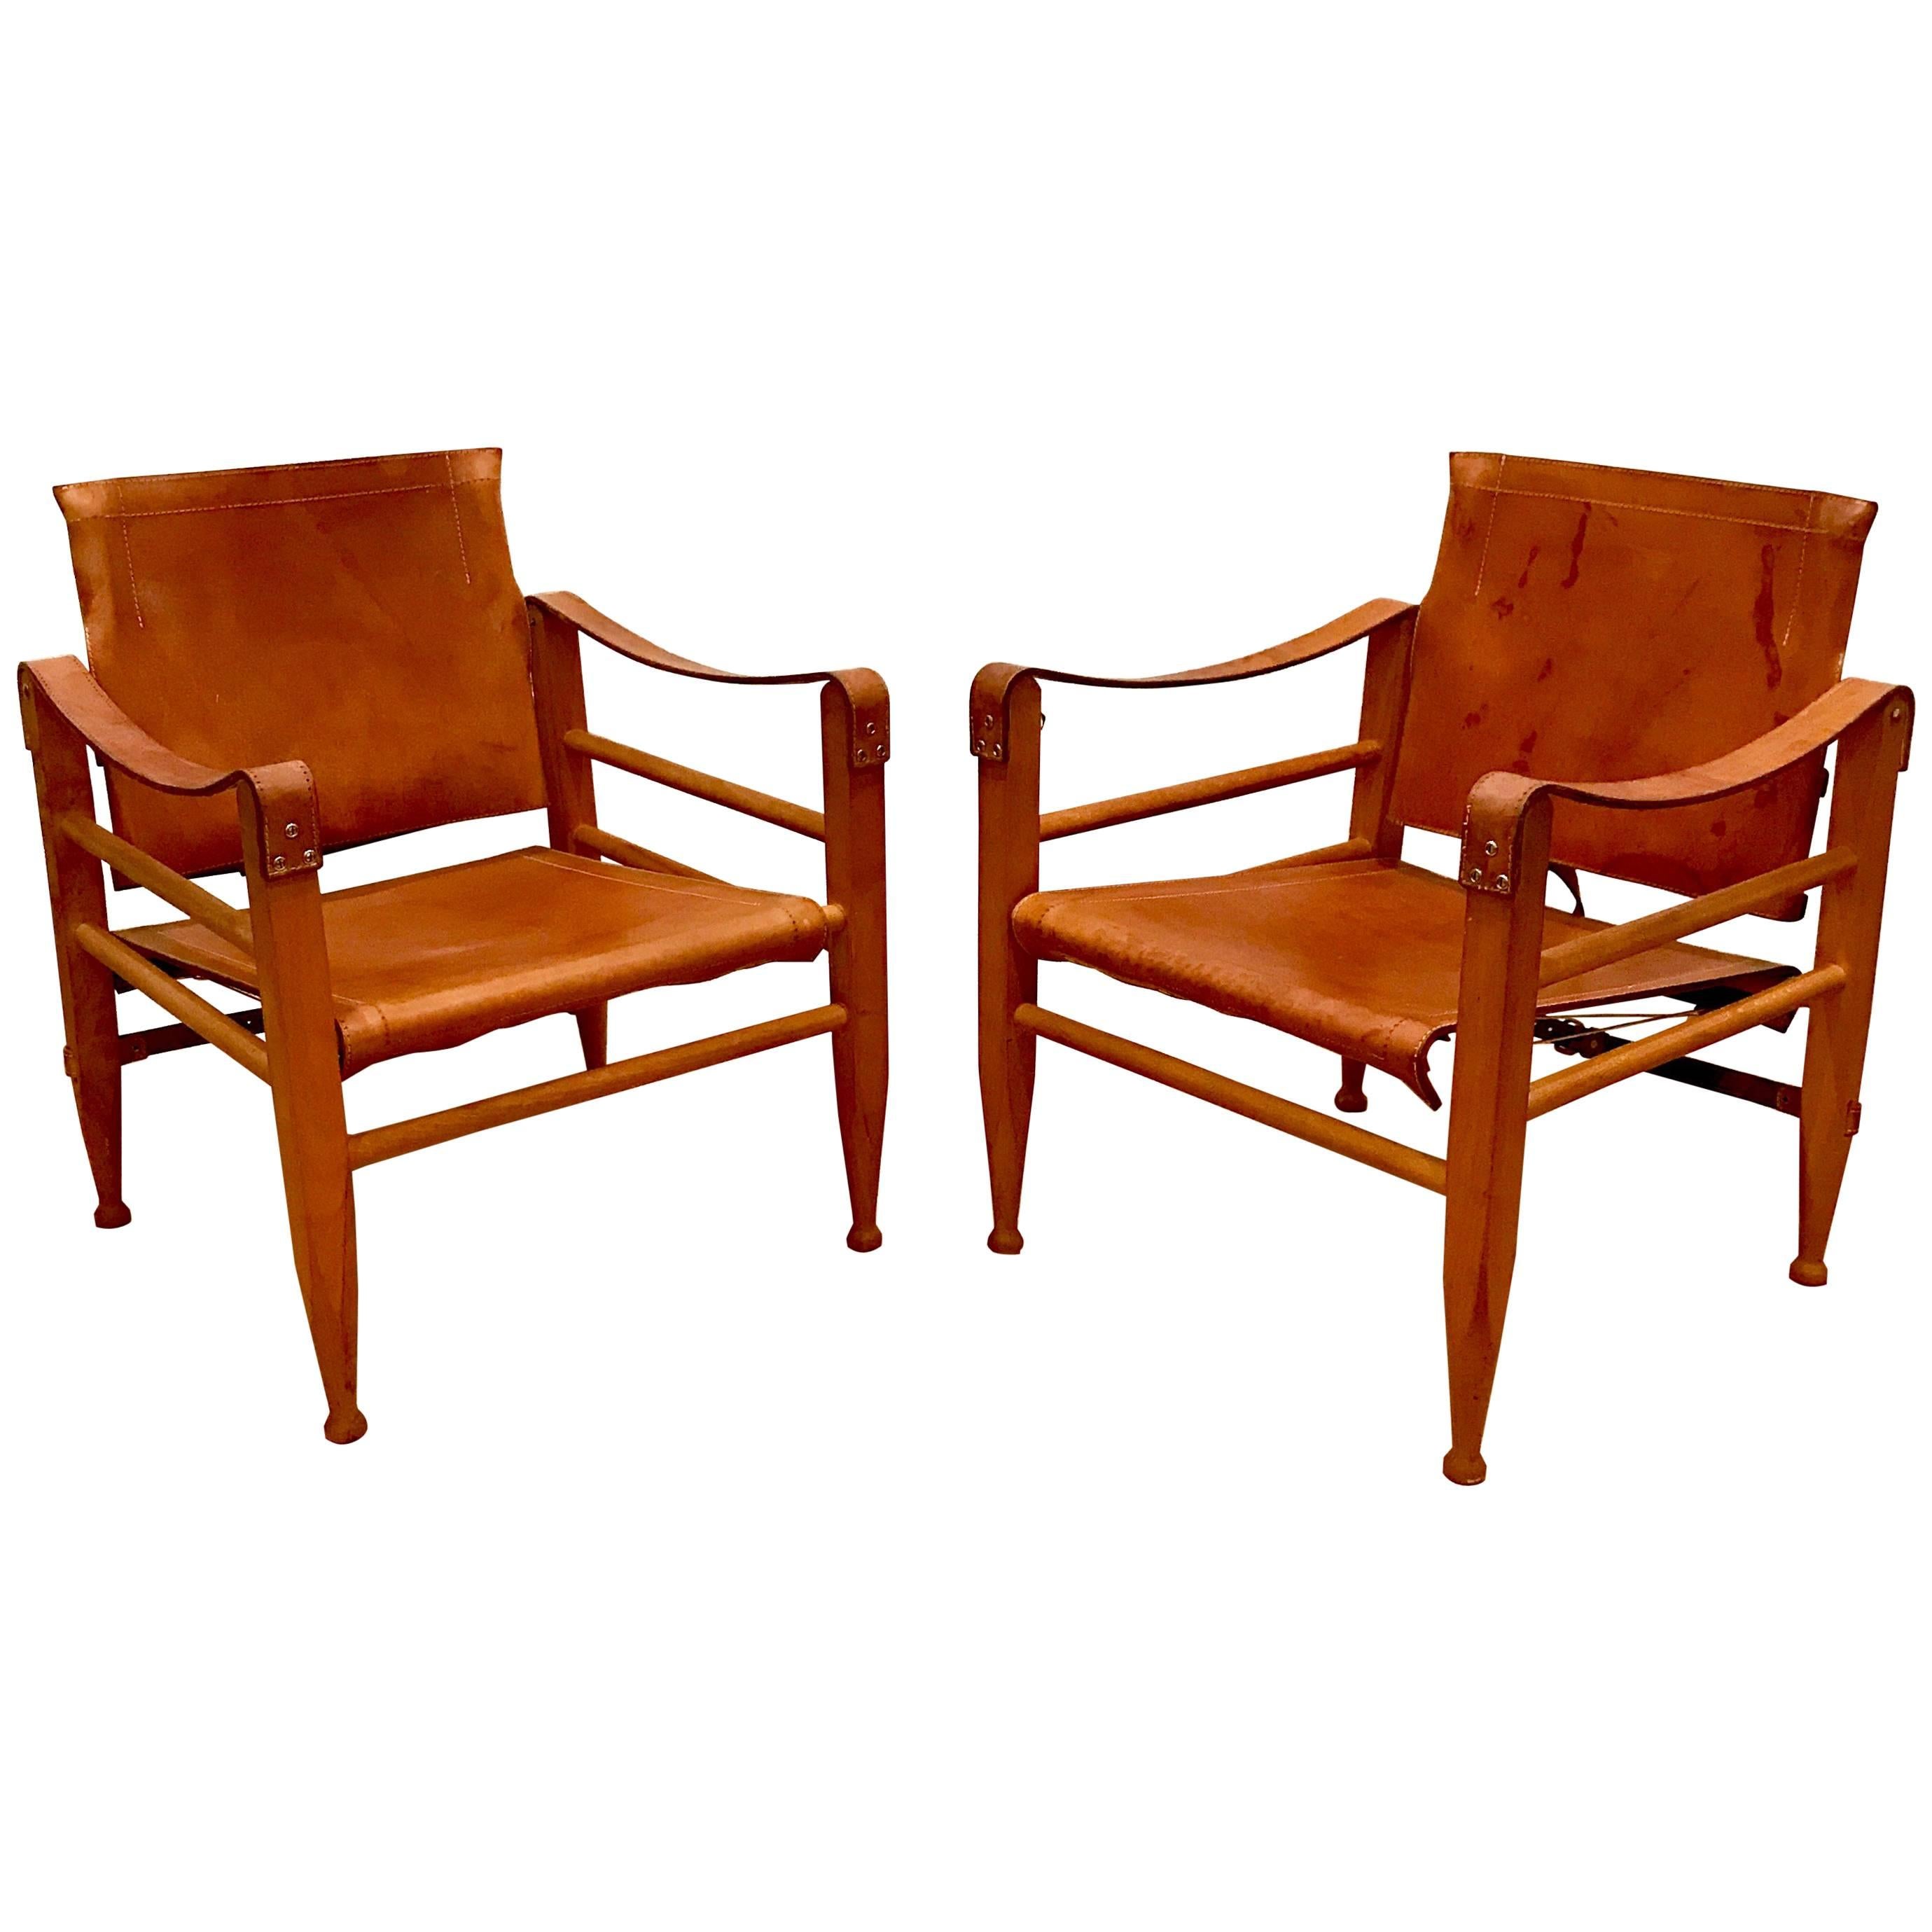 Pair of Danish Modern Wood and Leather Safari Chairs in the Style of Kaare Klint